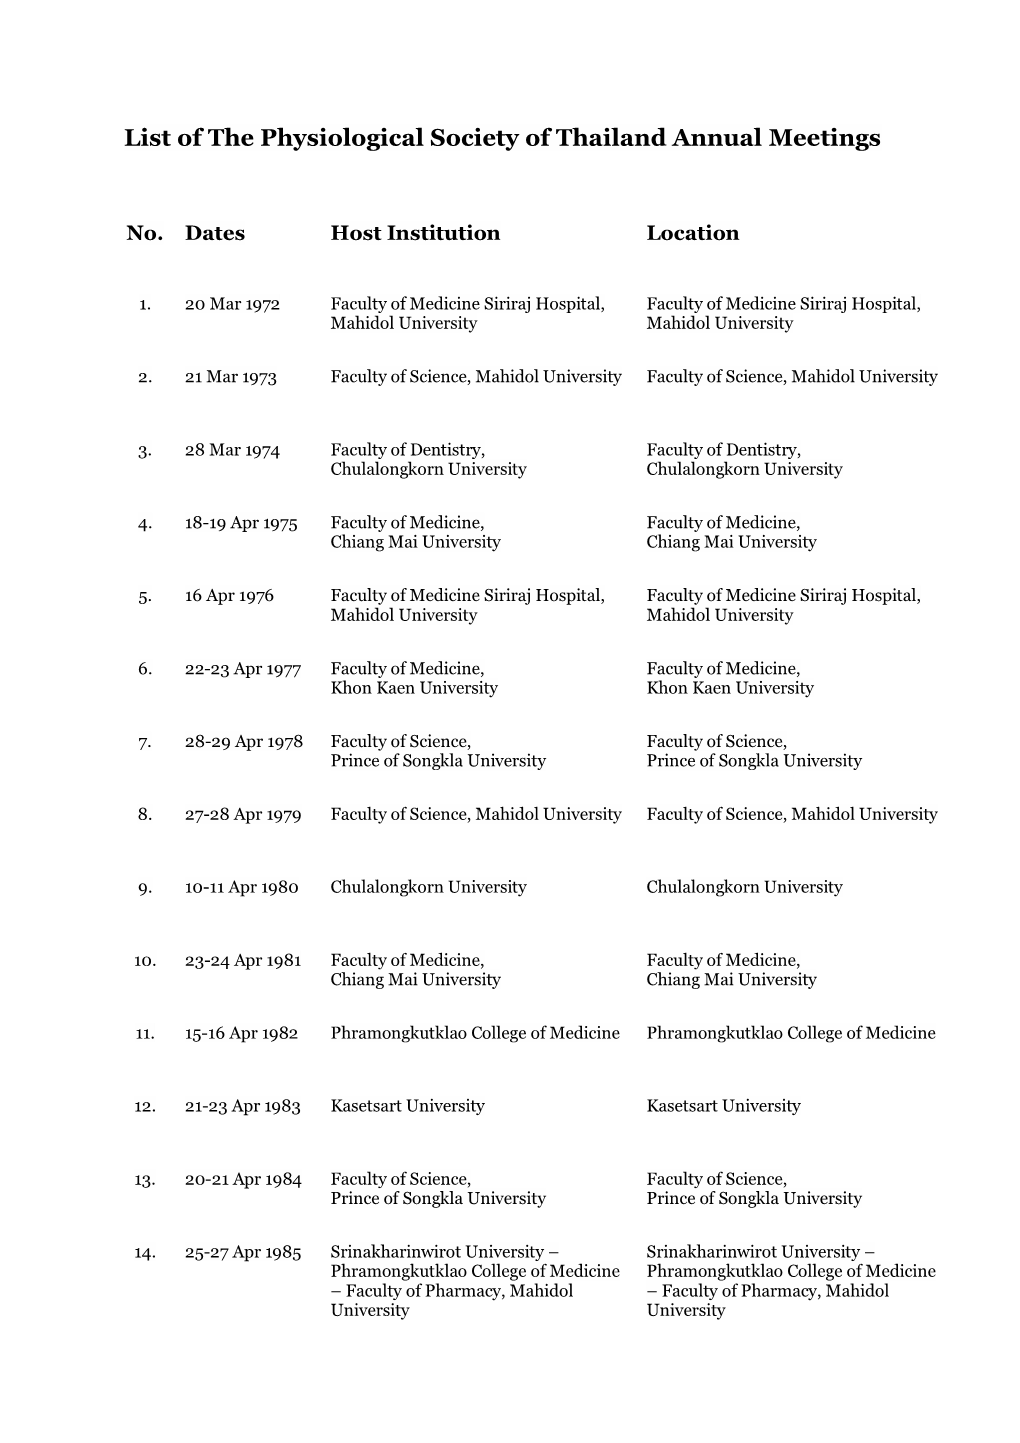 List of the Physiological Society of Thailand Annual Meetings